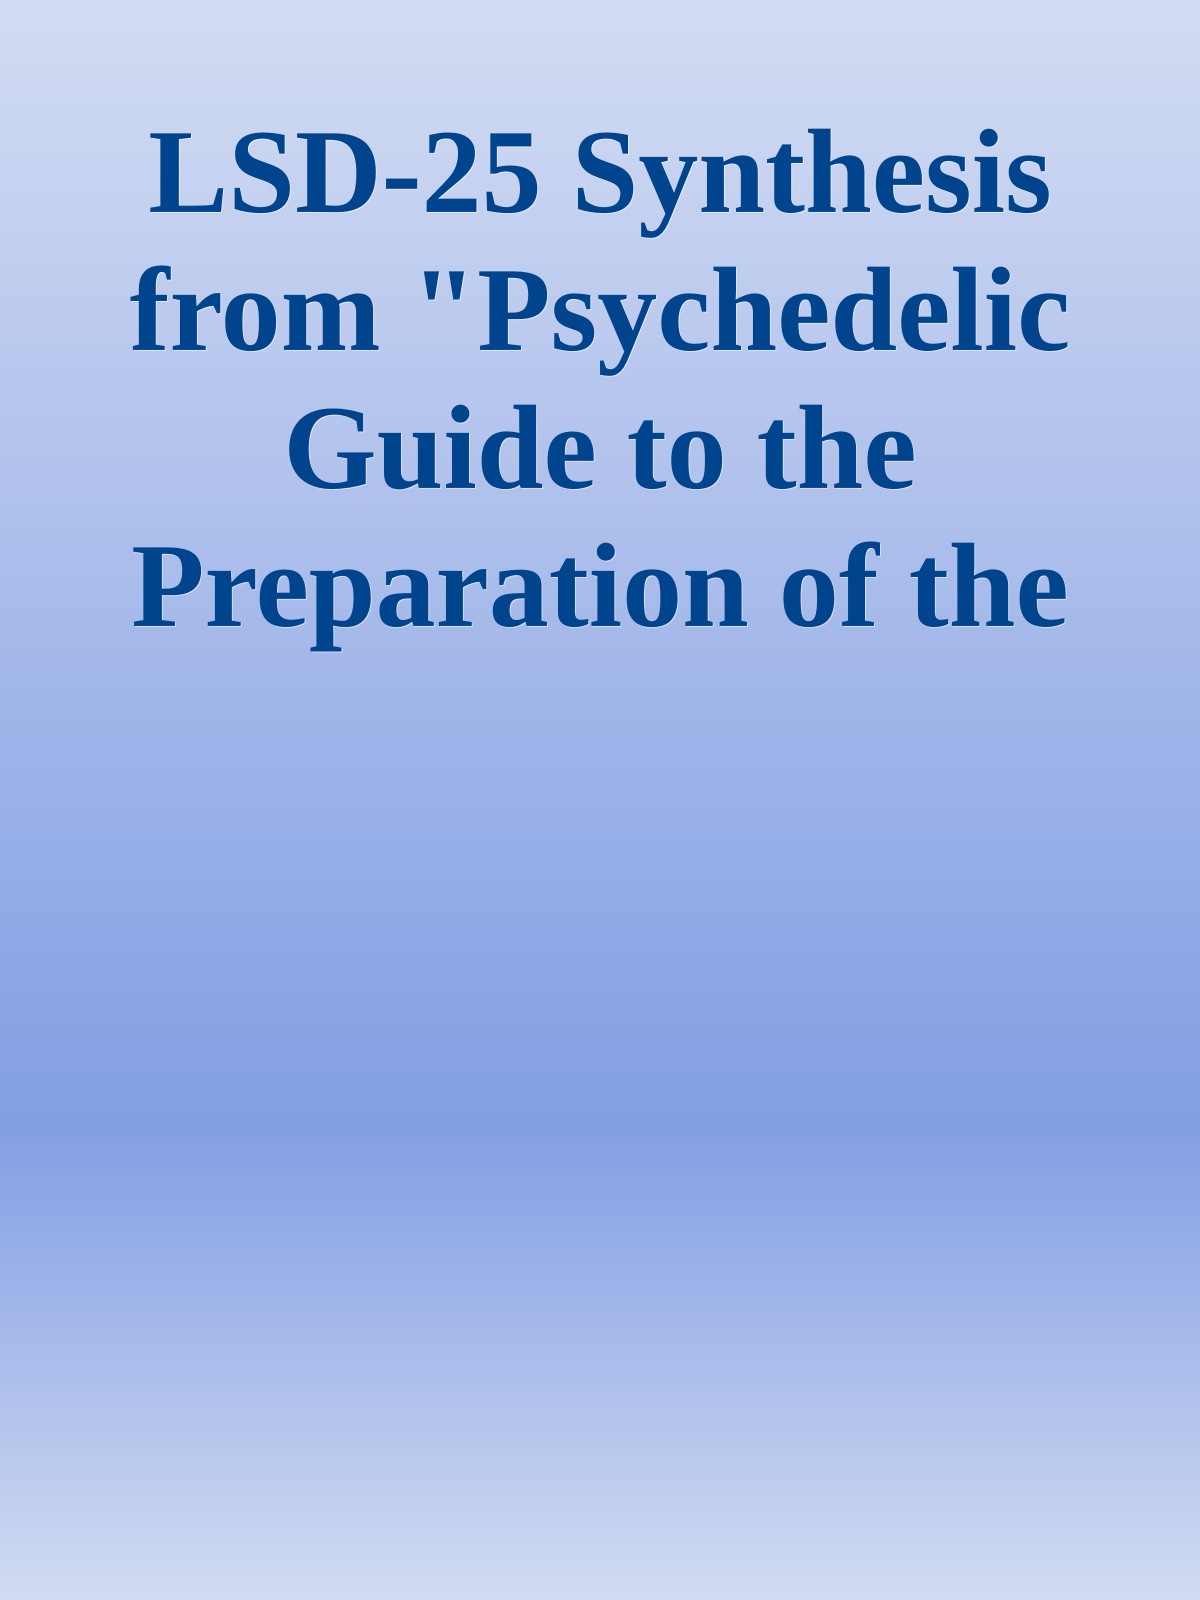 LSD-25 Synthesis from "Psychedelic Guide to the Preparation of the Eucharist"